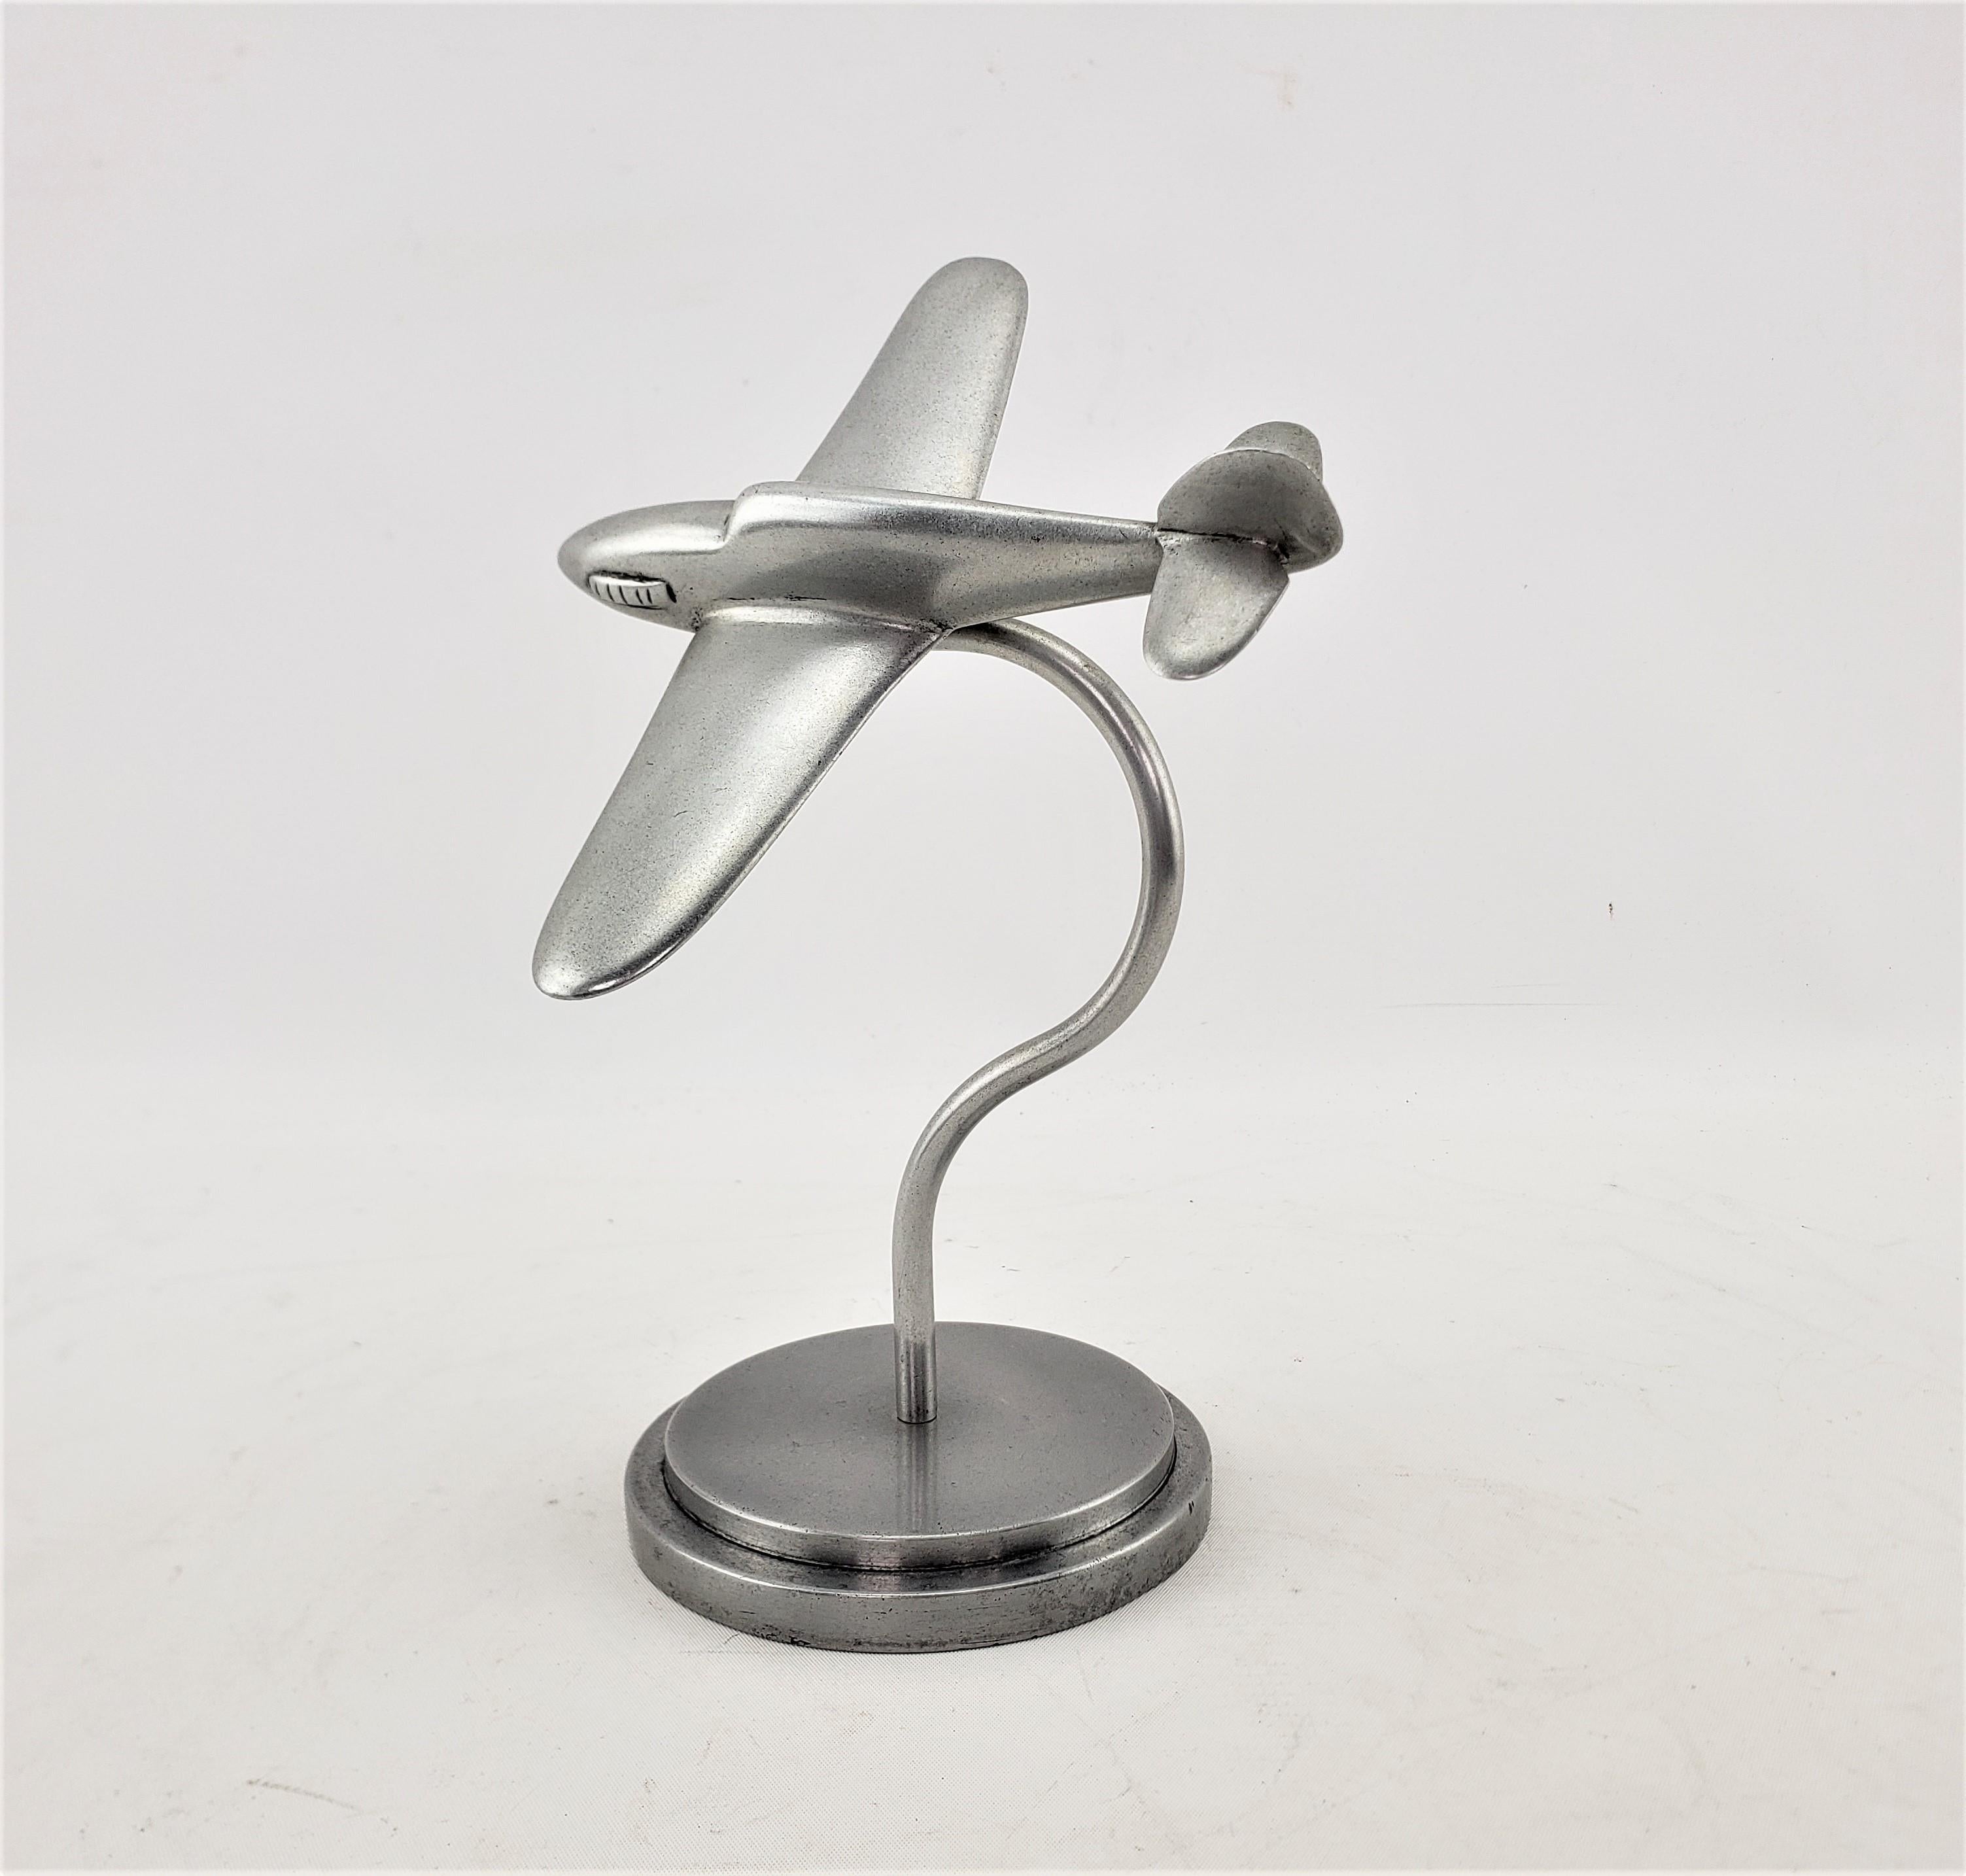 20th Century Art Deco Cast Aluminum Stylized Fighter Airplane Model or Sculpture & Stand